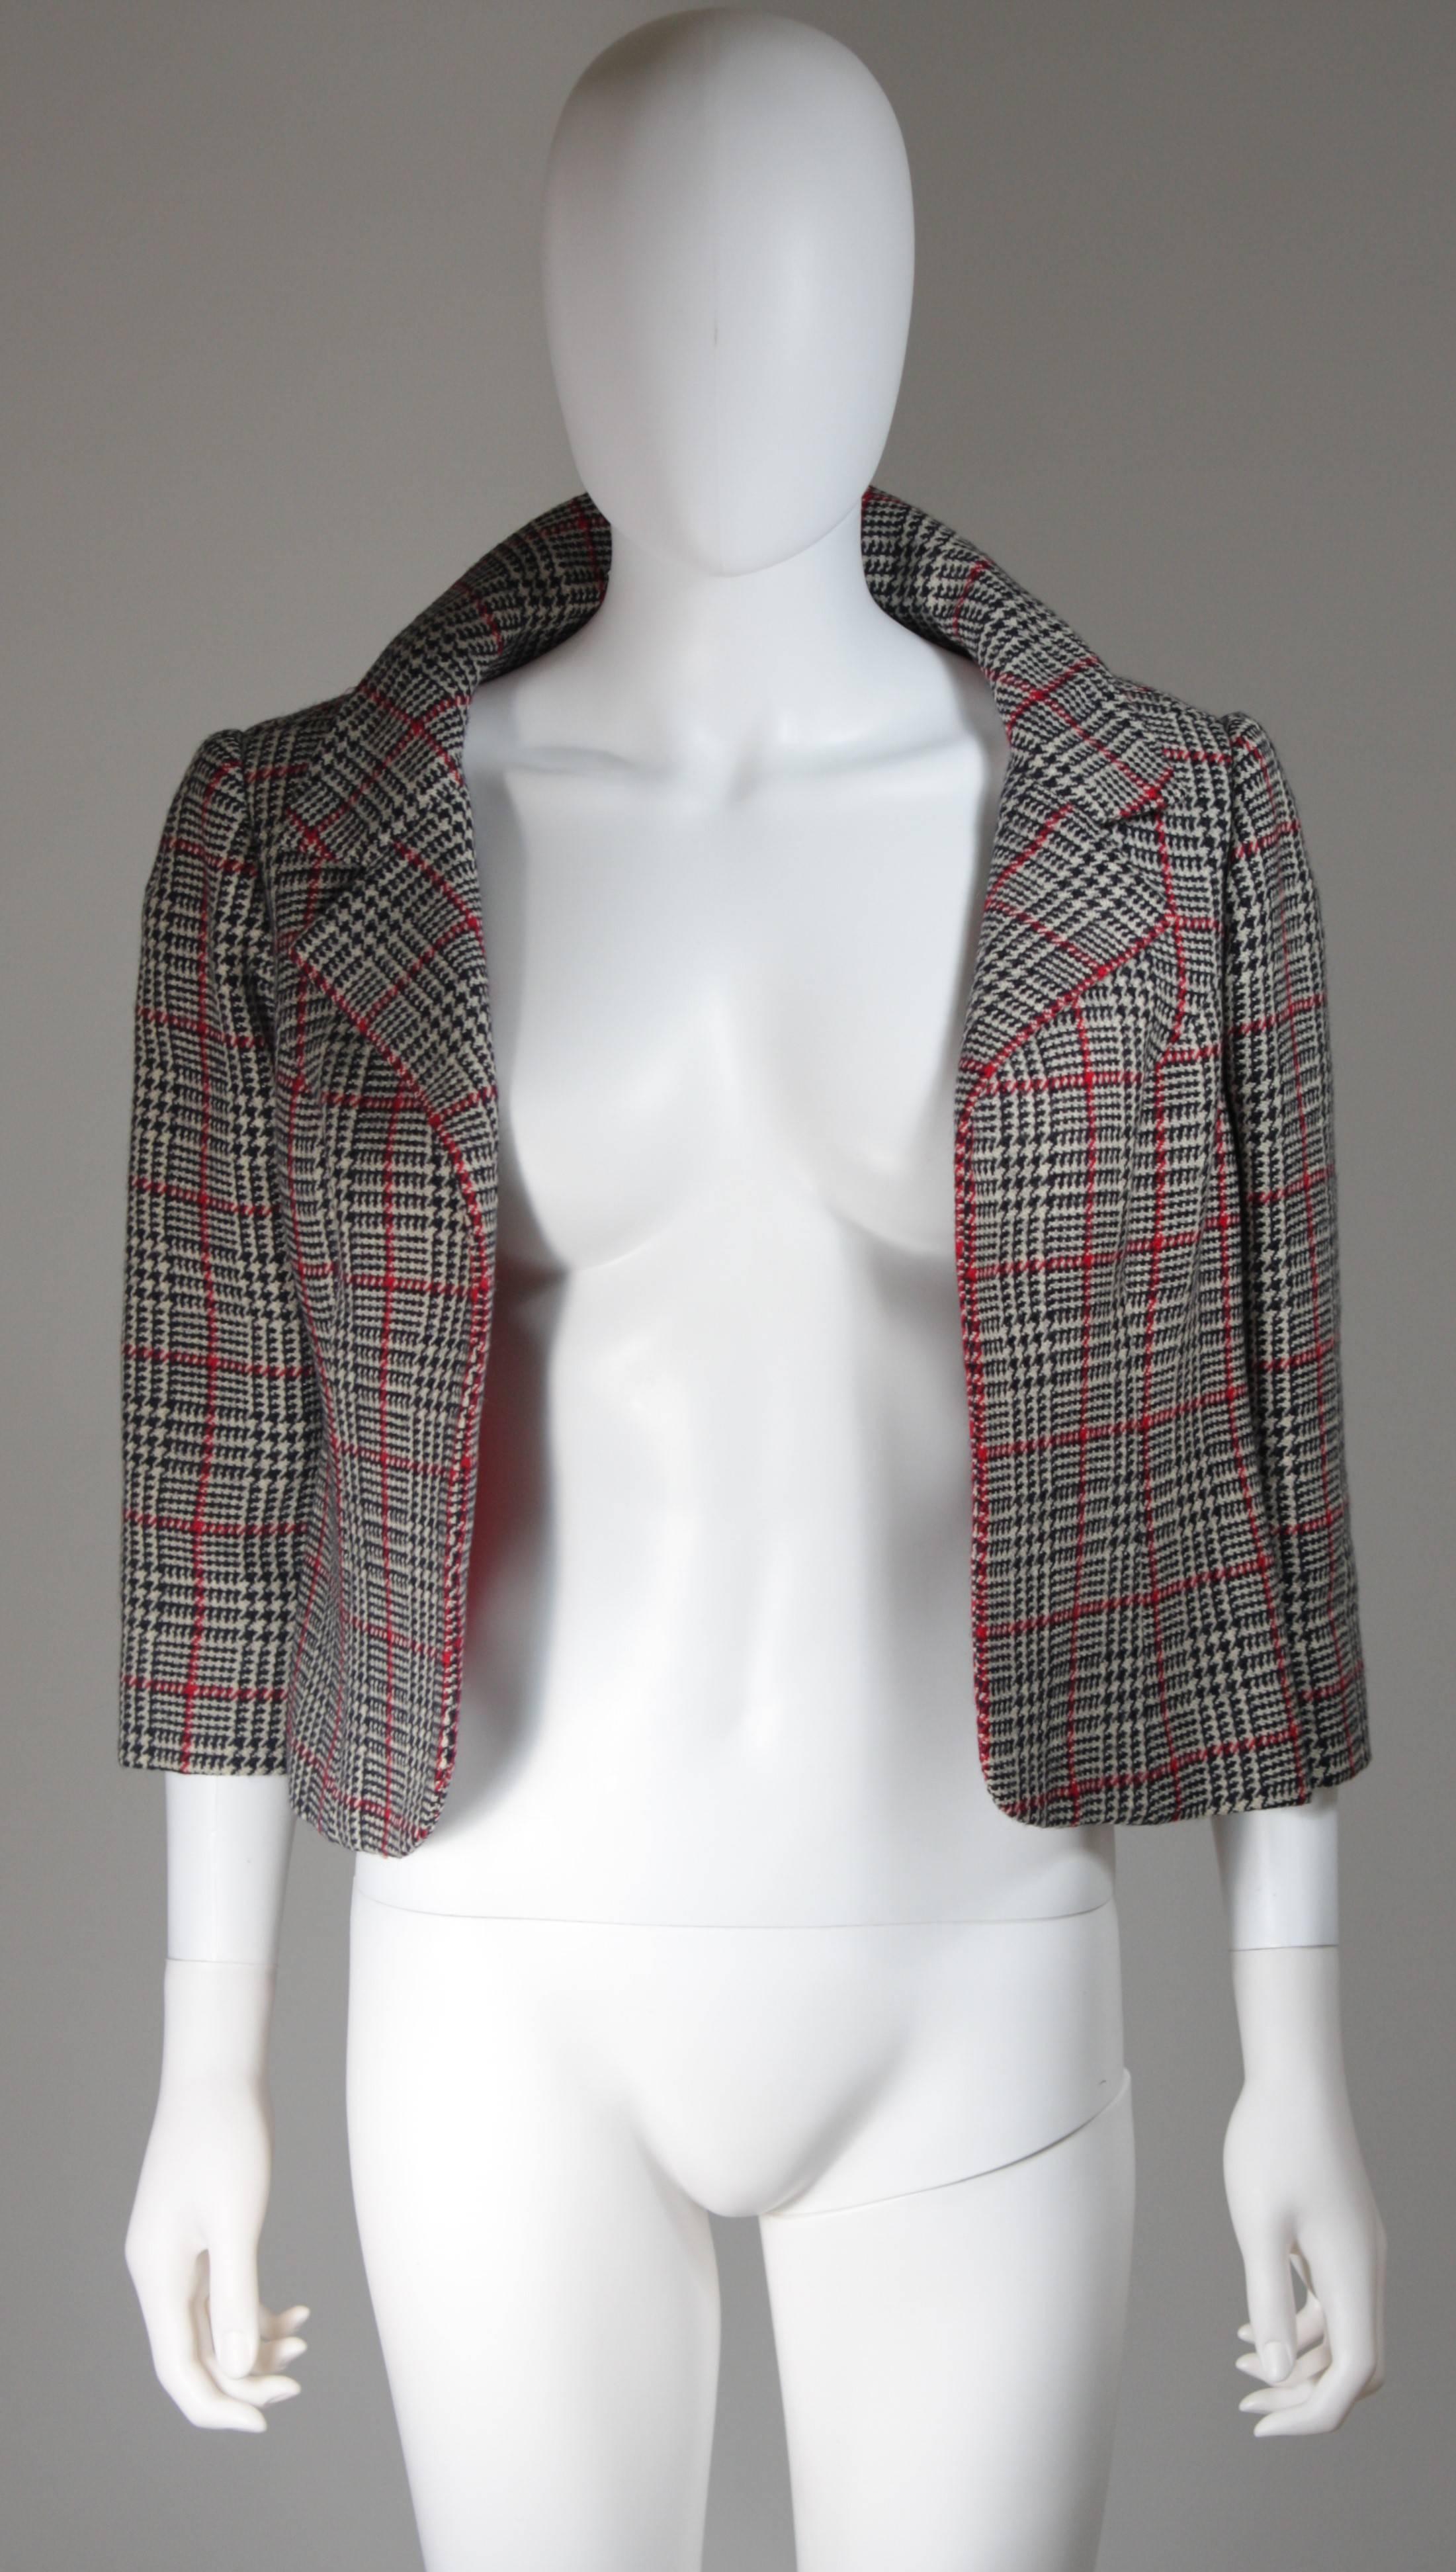 Galanos Black White and Red Wool Plaid Skirt Suit 4 Piece Size Small Medium In Excellent Condition For Sale In Los Angeles, CA